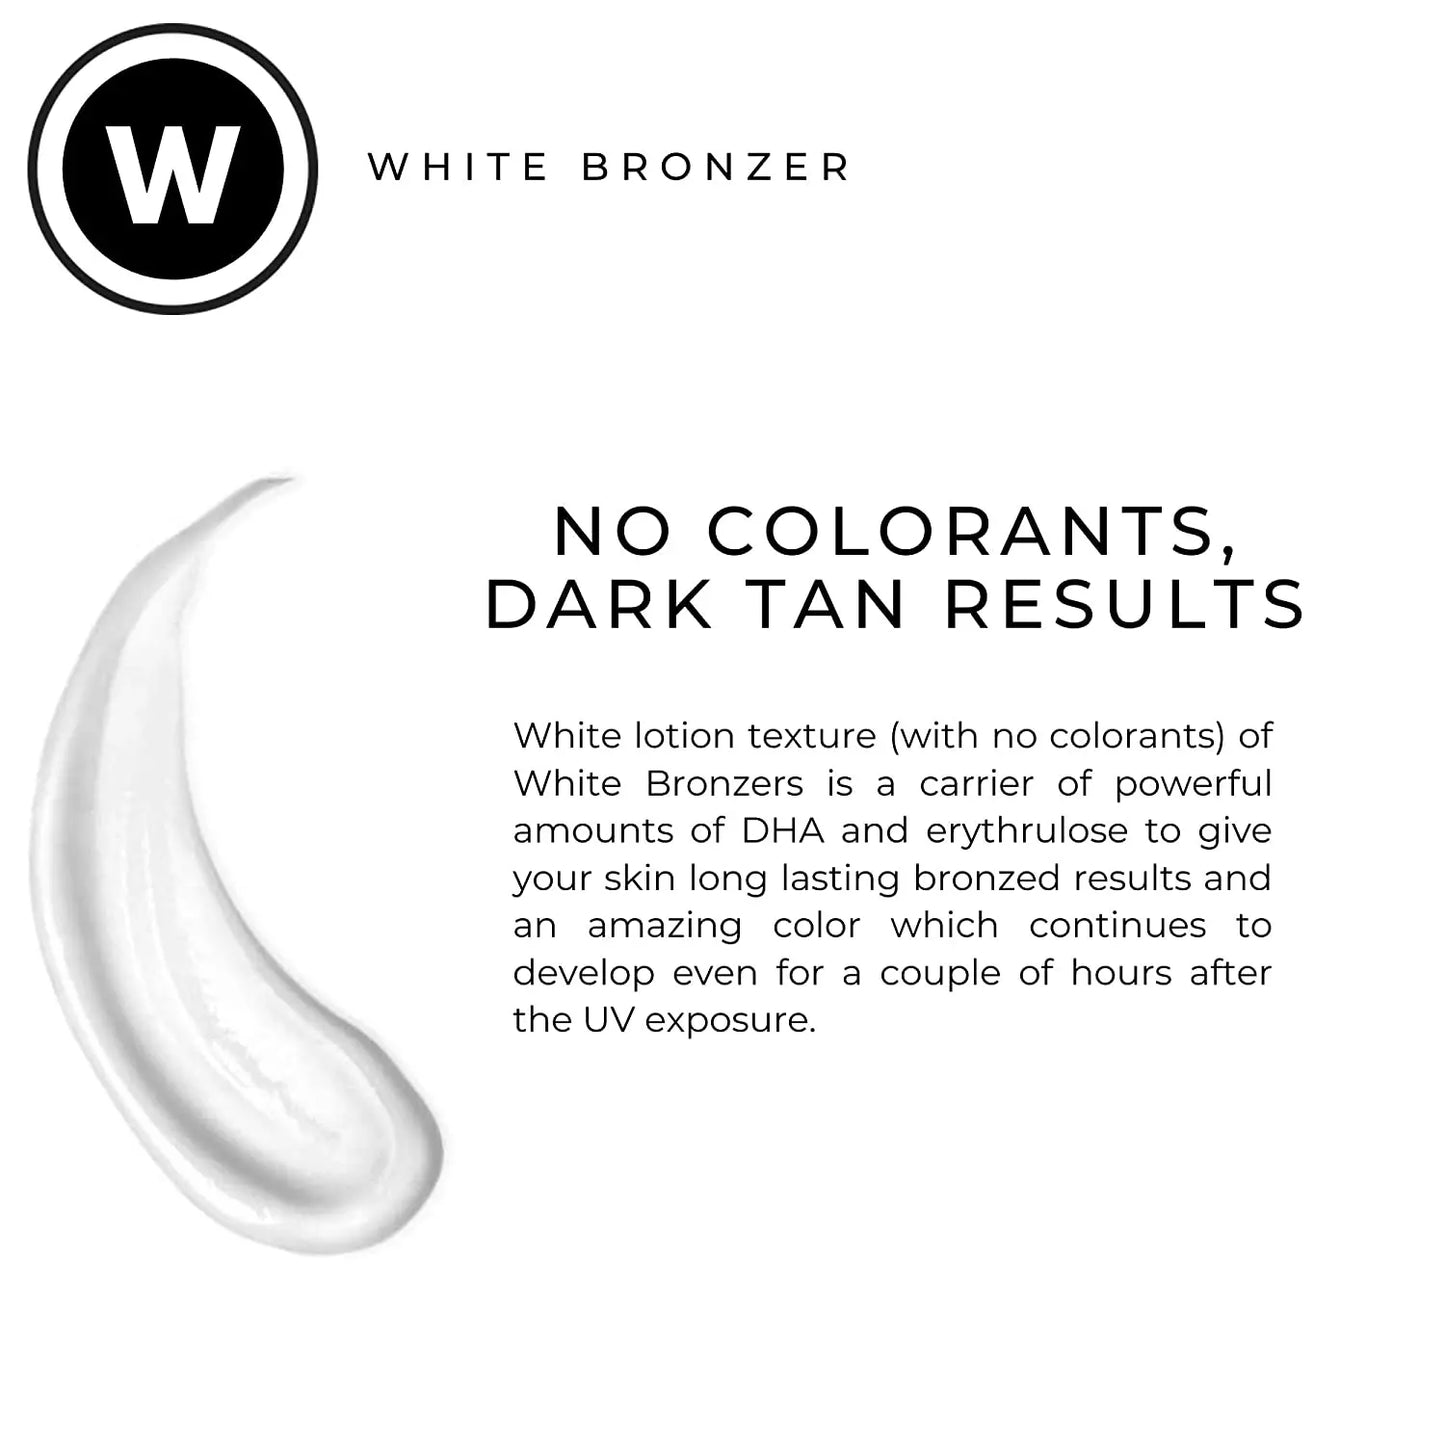 White tanning lotion with no colorants for dark tan results